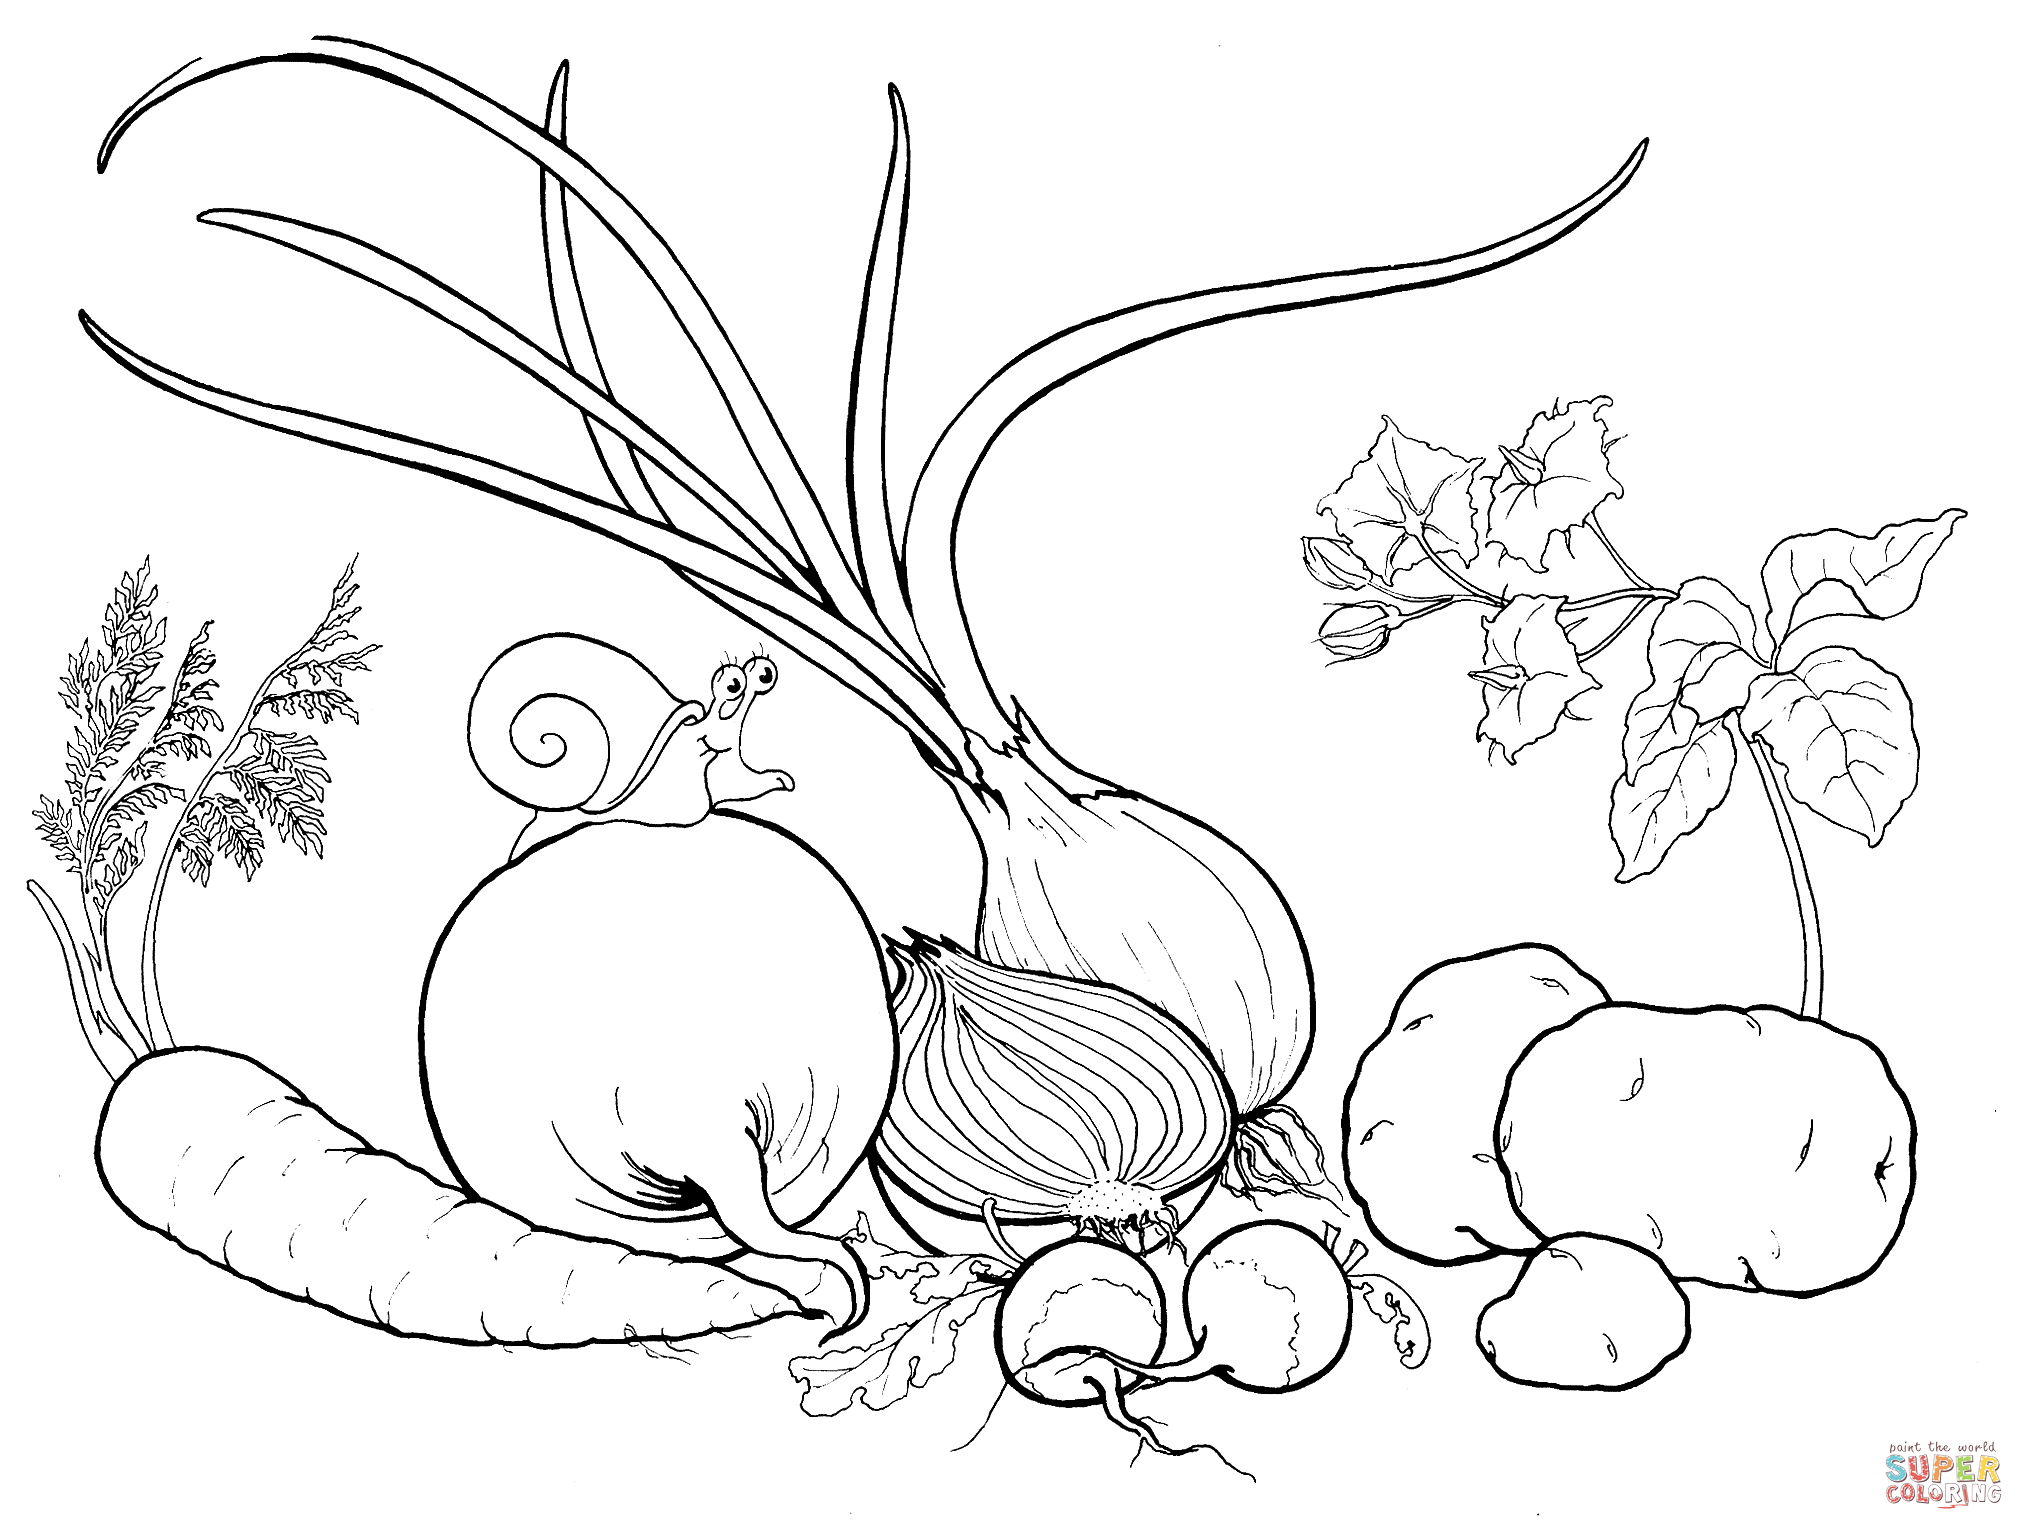 Carrots coloring pages | Free Coloring Pages